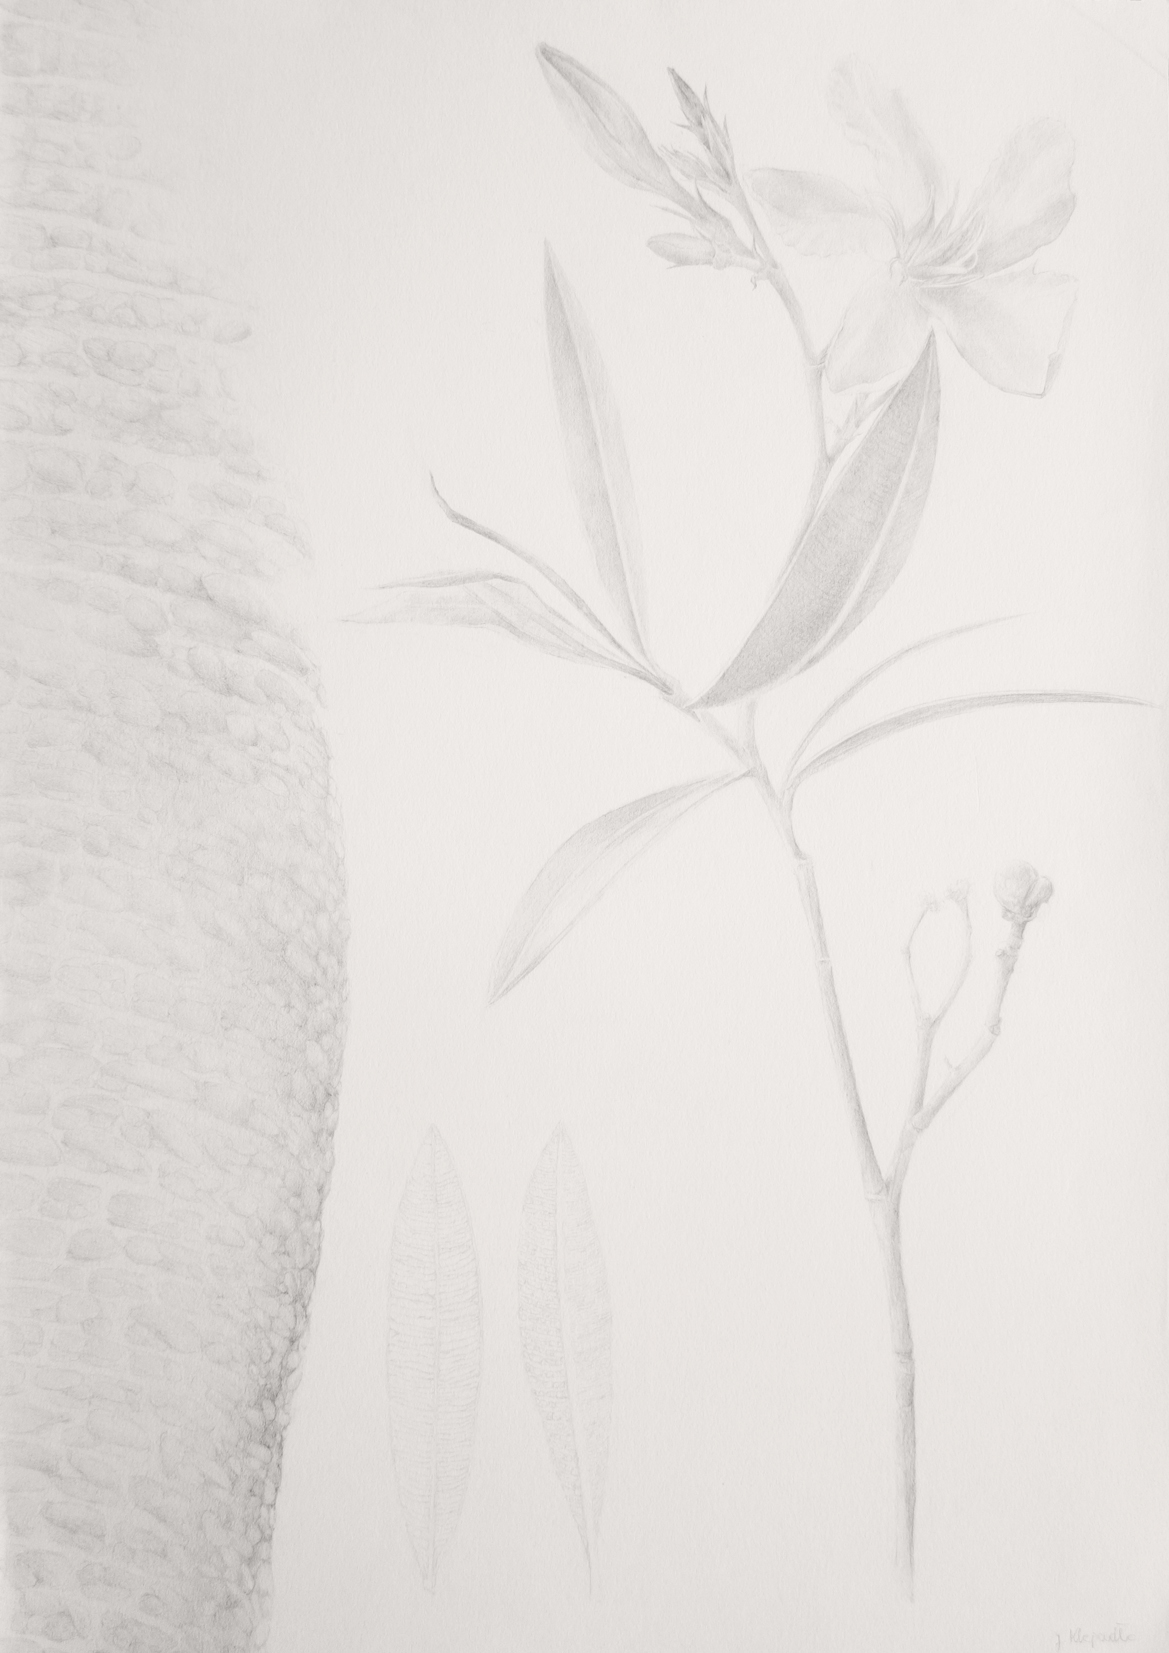 Nerium oleander - drawing of the plant from the series of botanical artworks "Plants of Andalucia" by Joanna Klepadło